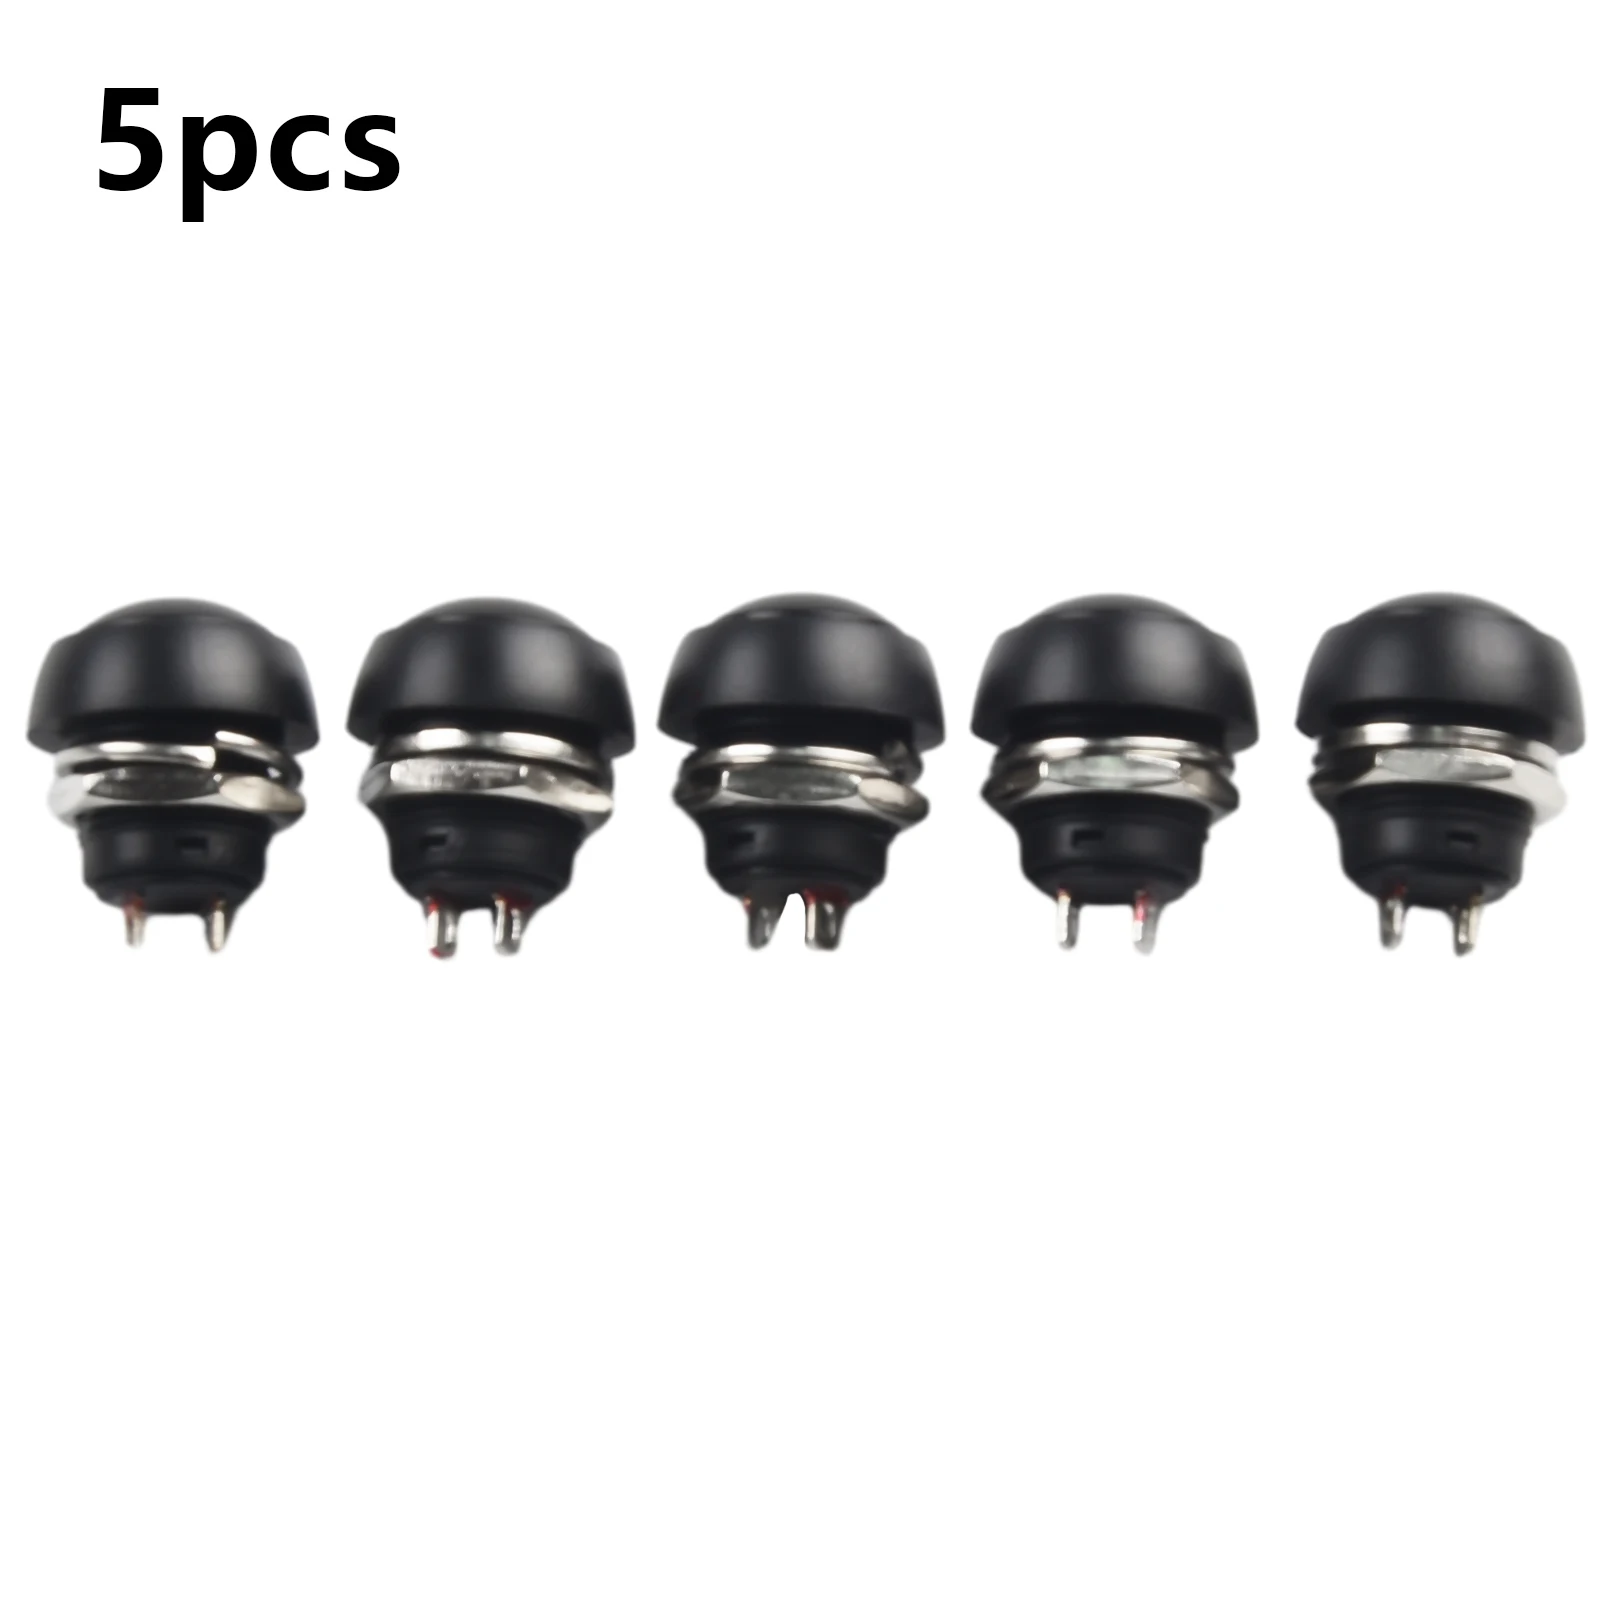 

5Pcs 12mm Waterproof Momentary Switches ON/OFF Push Button Round SPST Switch 2 Pin 1NO Spherical Head Shape Push Switch